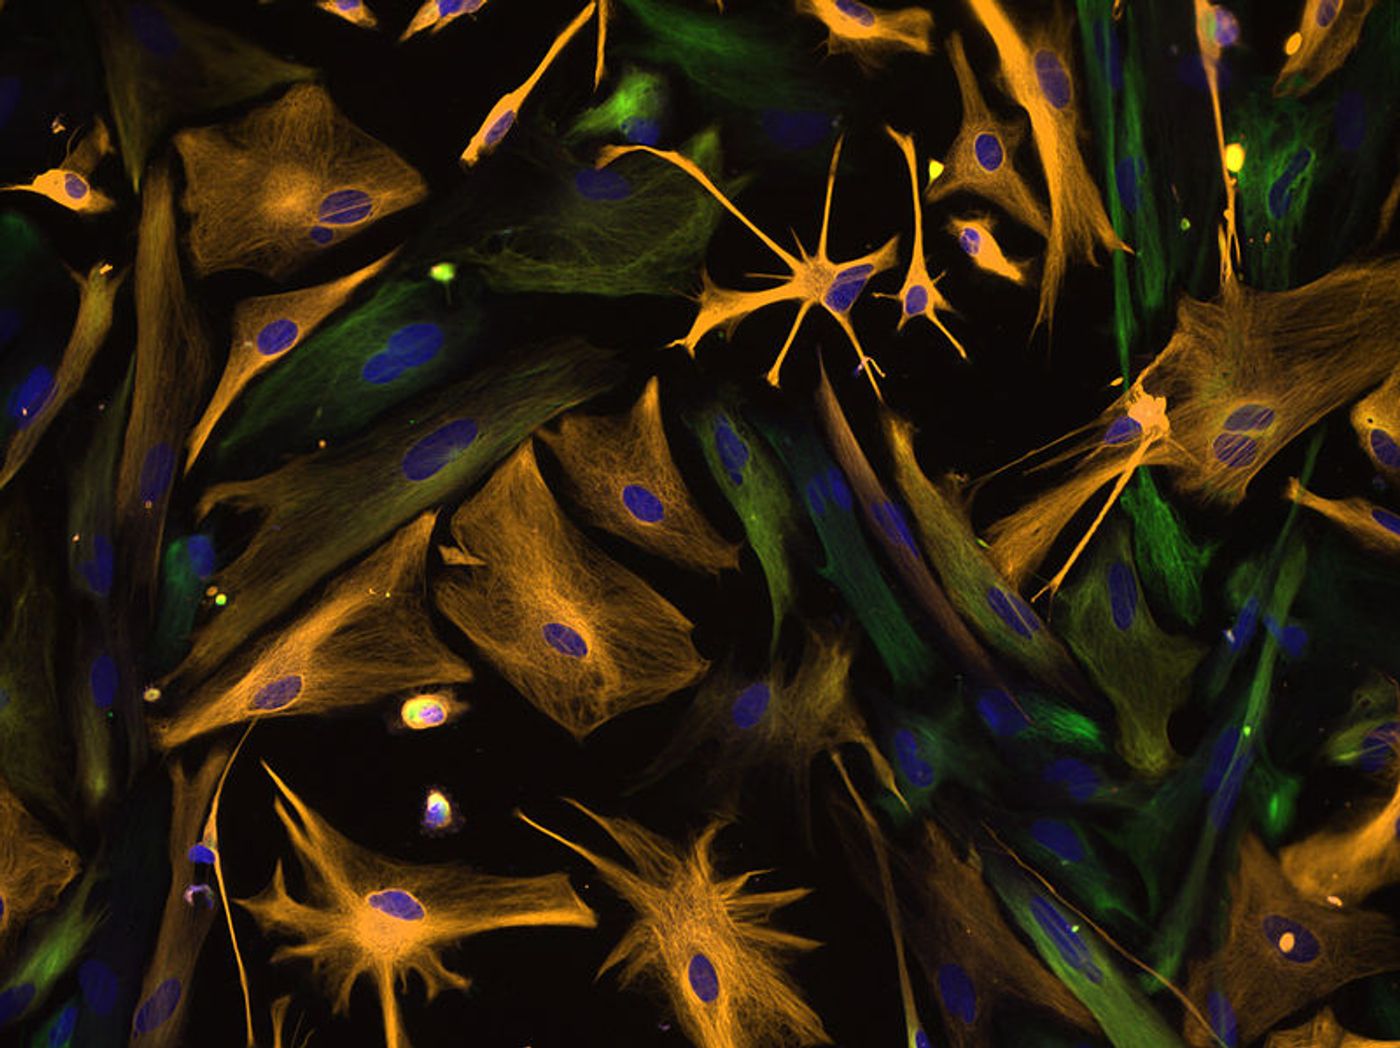 Human neural progenitor cells / Credit: National Institutes of Health